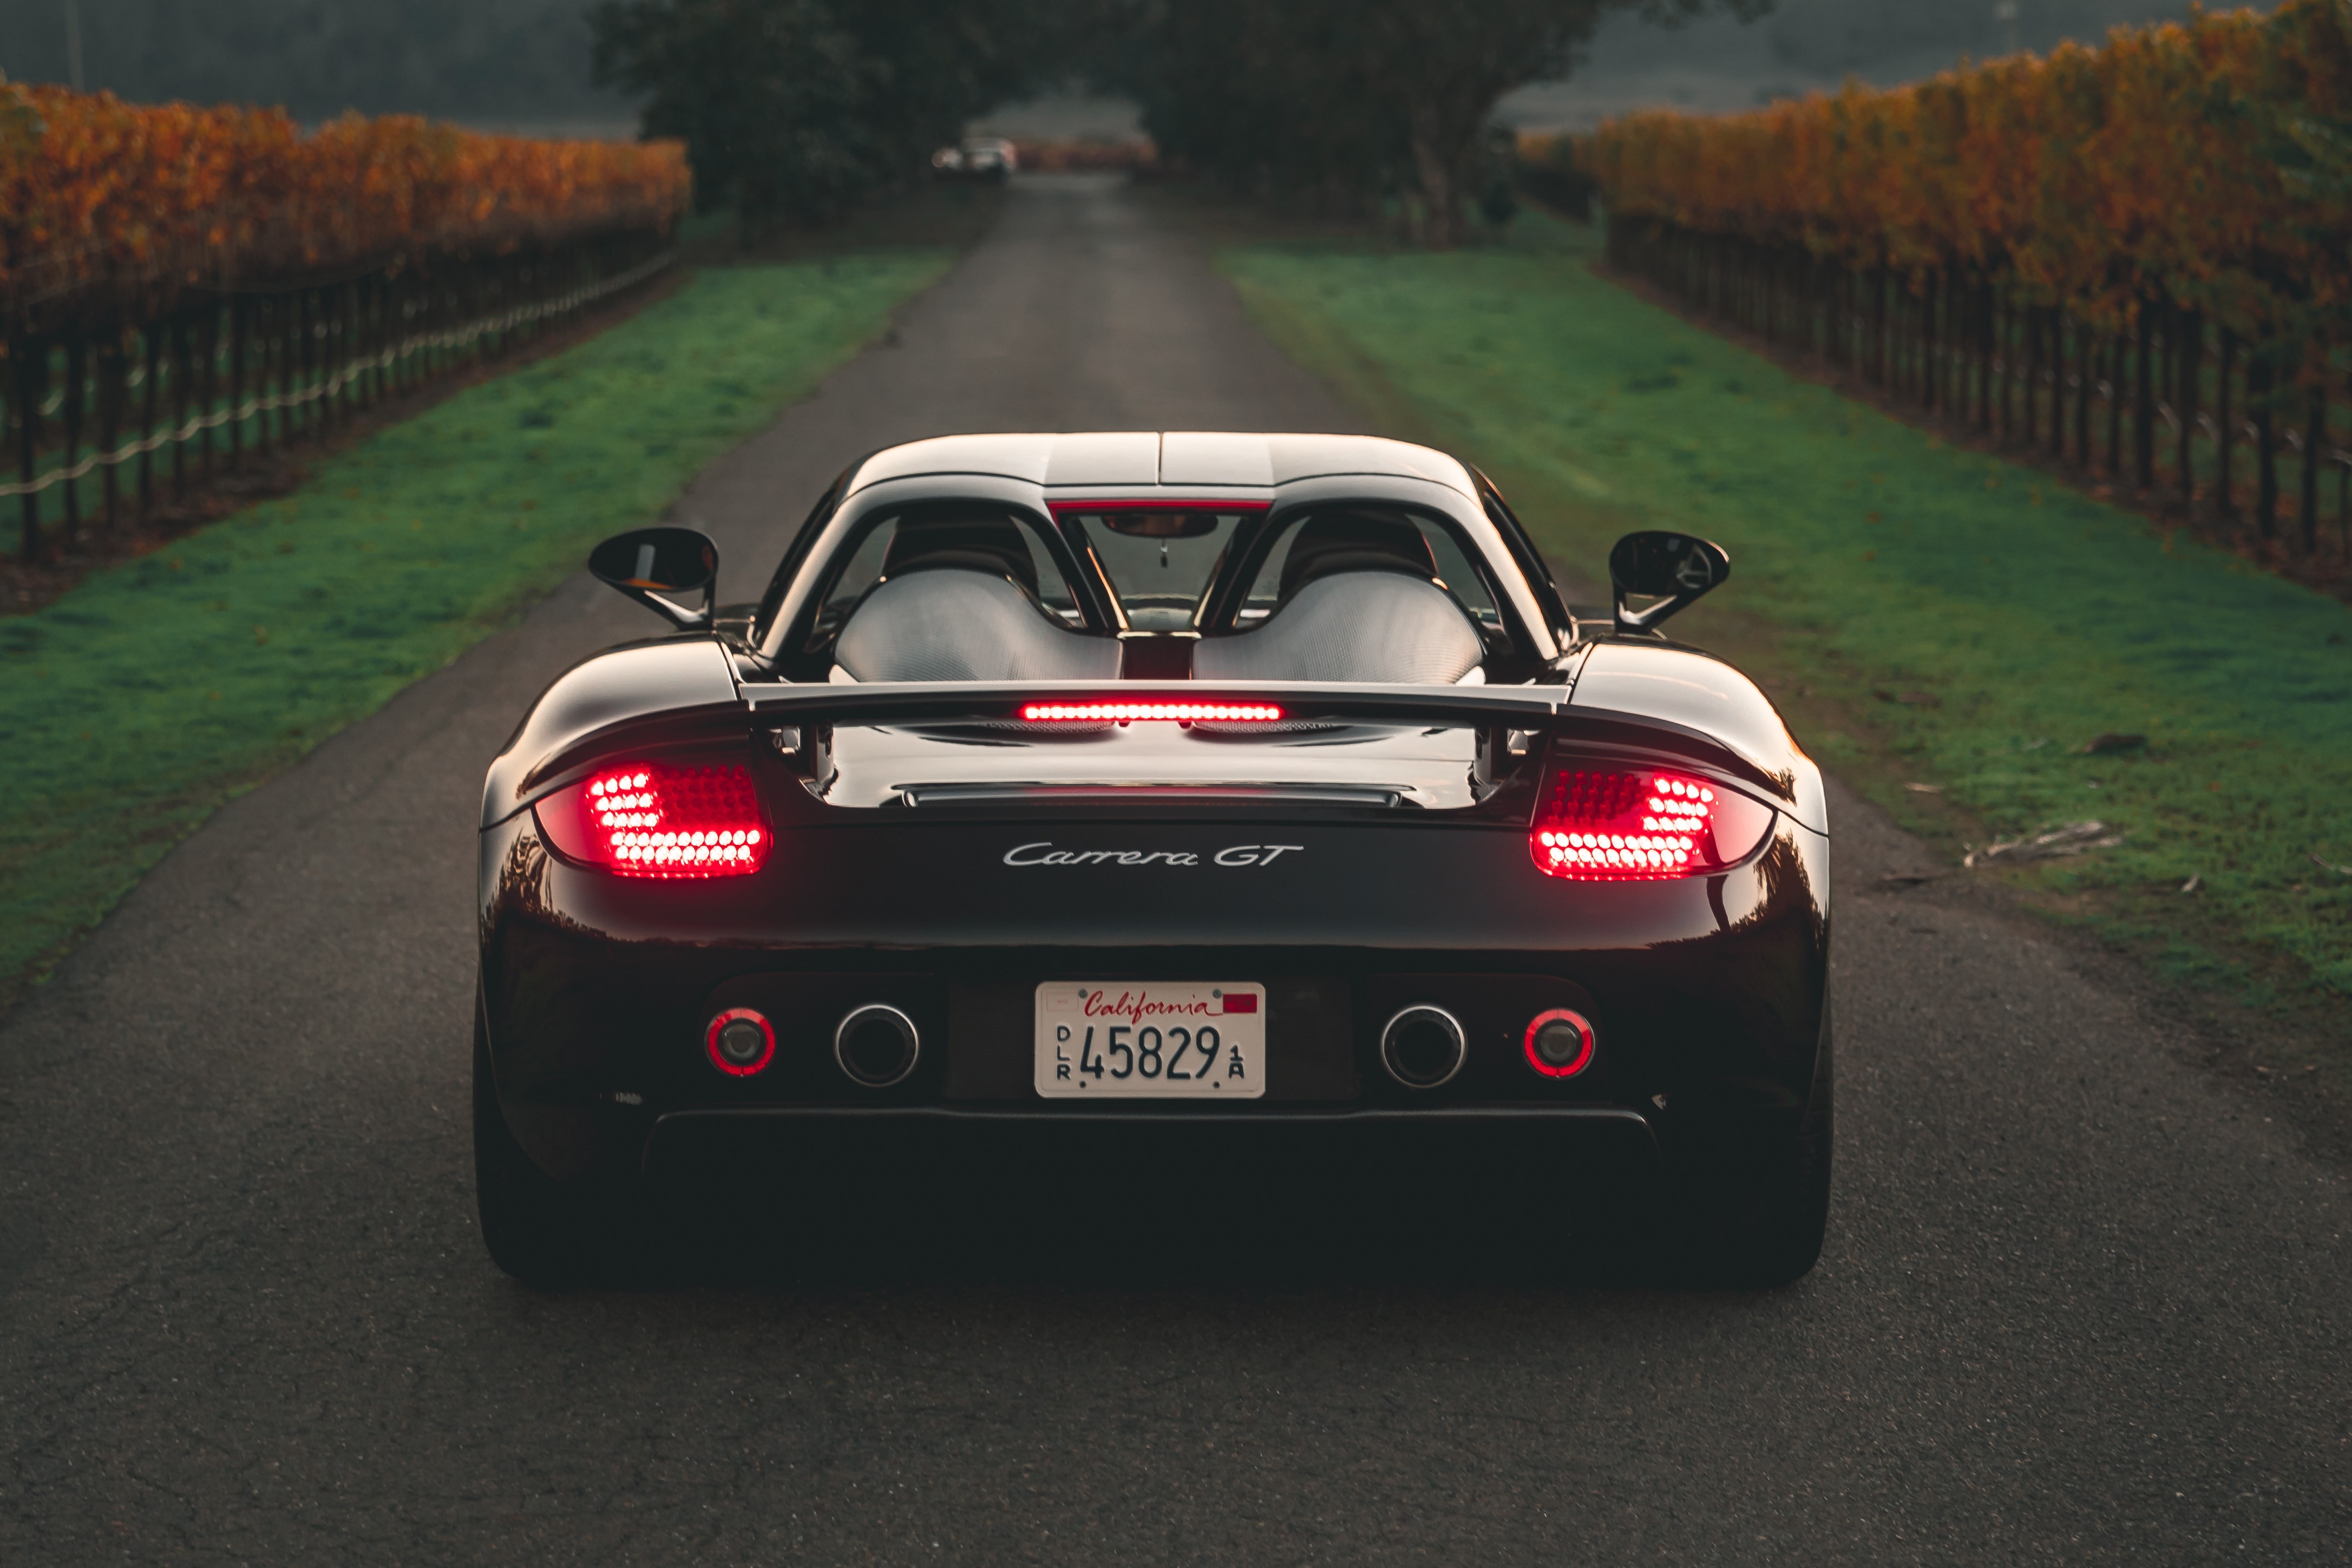 How this Porsche specialist came to own his dream Carrera GT